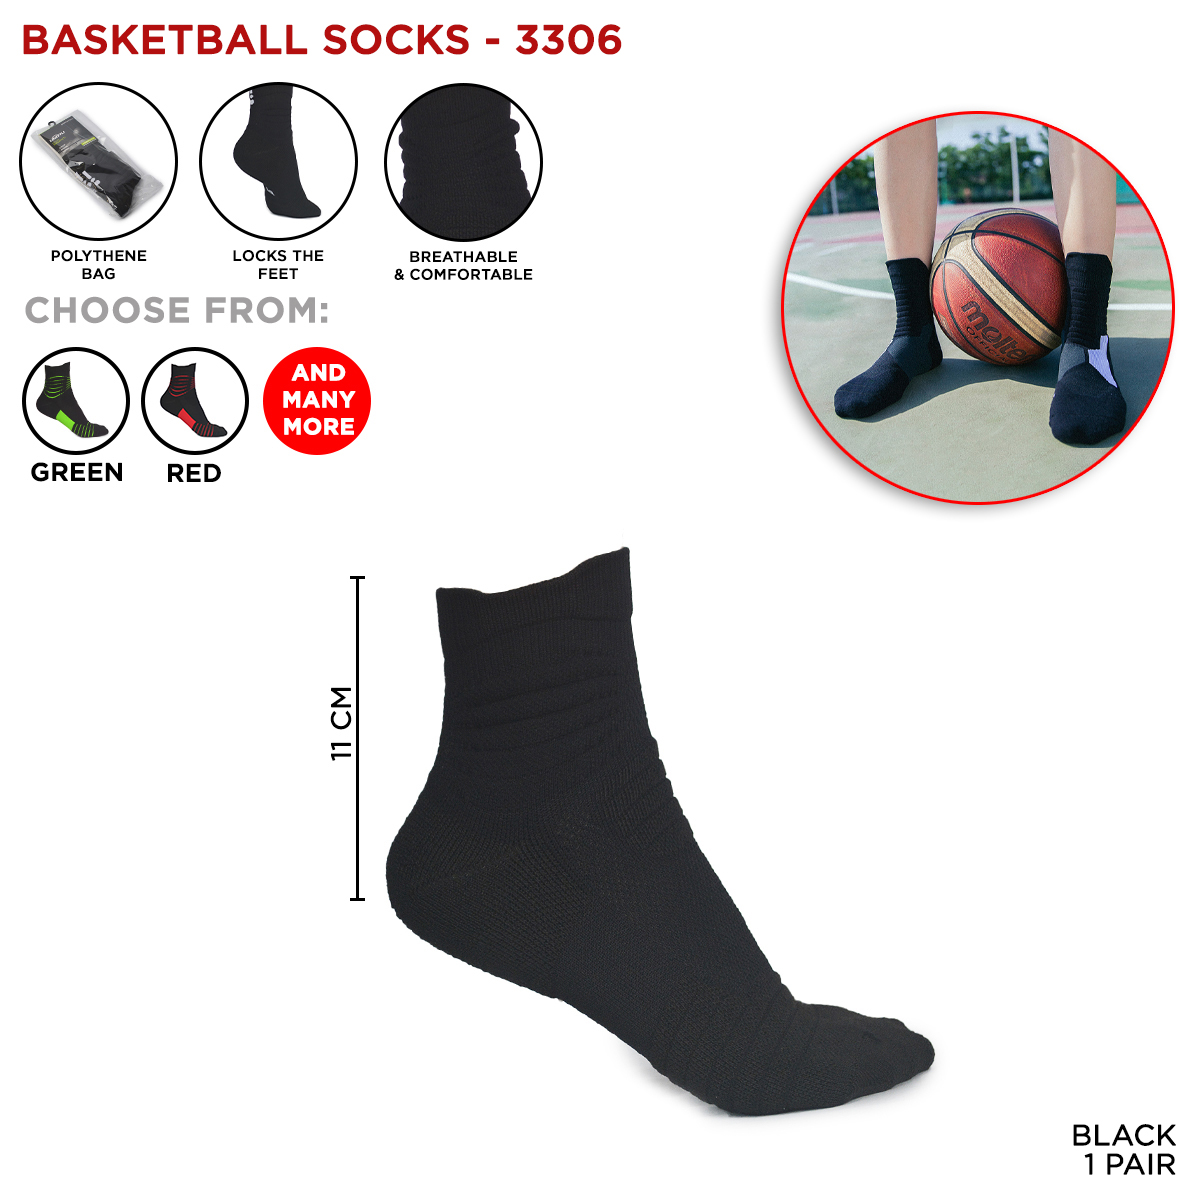 Imported Ankle Men & Women Socks Breathable Socks Cotton Solid Casual Socks  available in multi colors Red, Yellow, Black, White & Grey